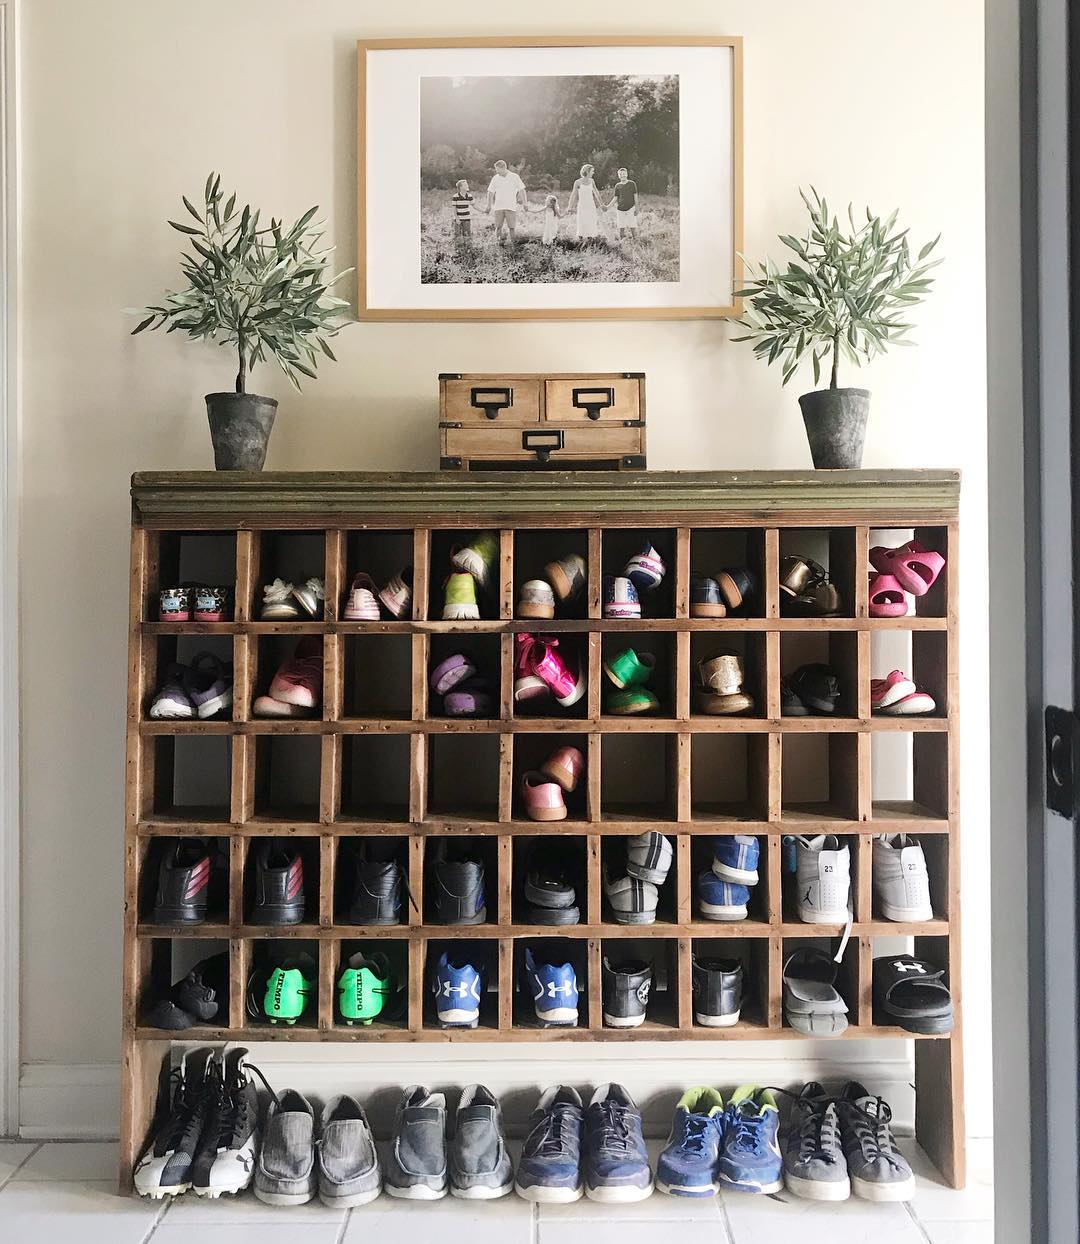 Cubbies holding several pairs of shoes in home entryway.